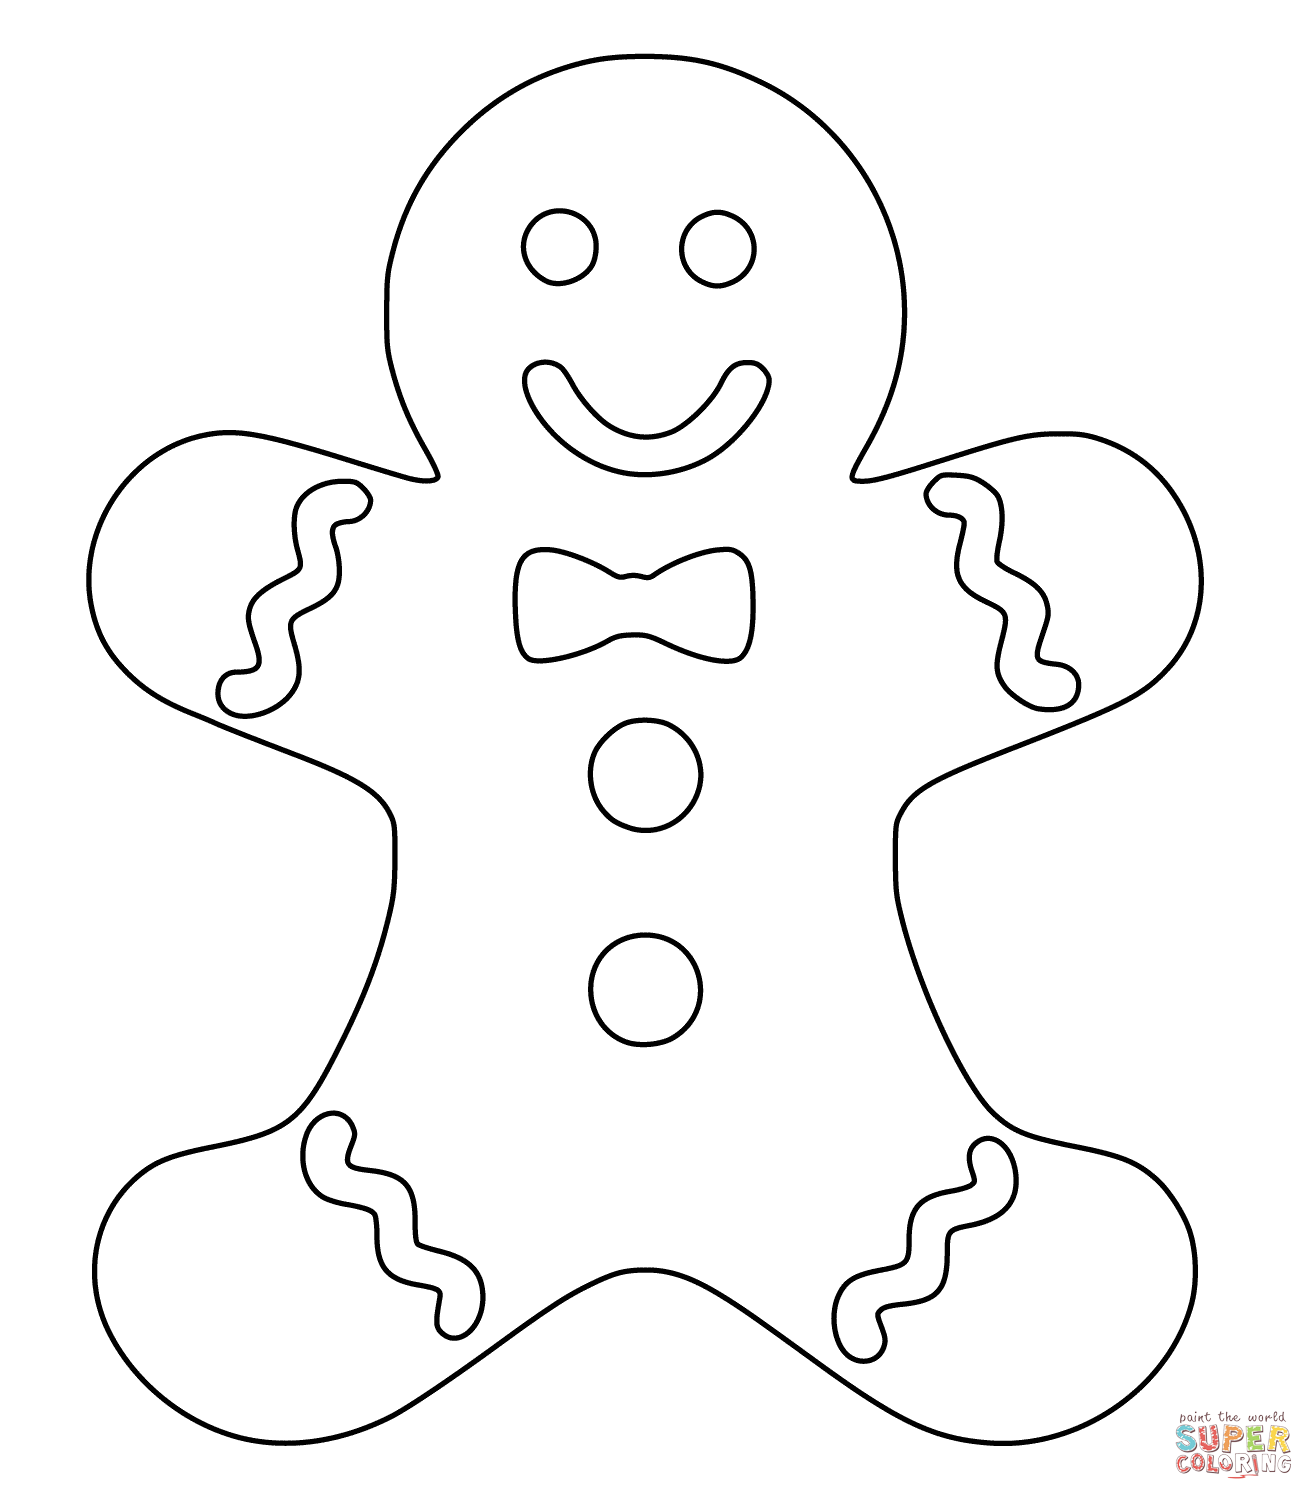 Christmas gingerbread man coloring page free printable coloring pages